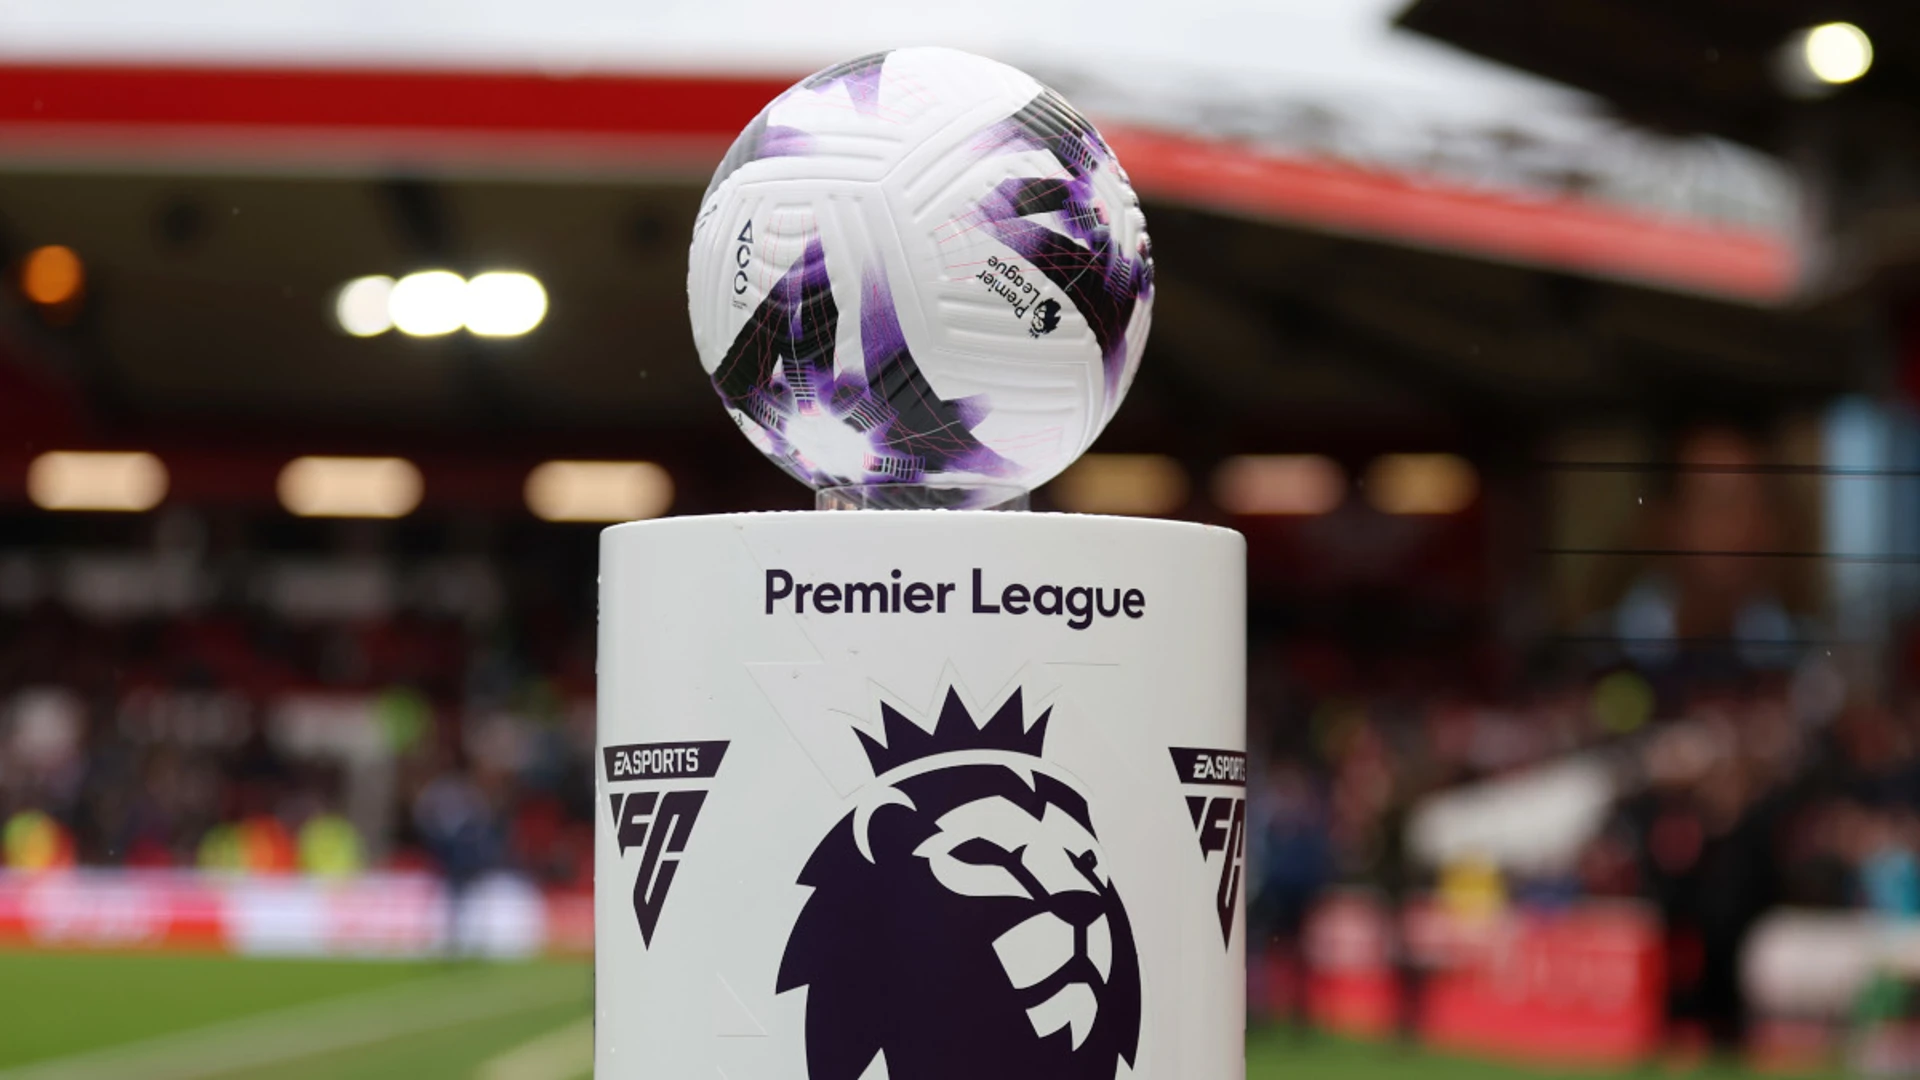 Premier League Opening Day: What the stats say